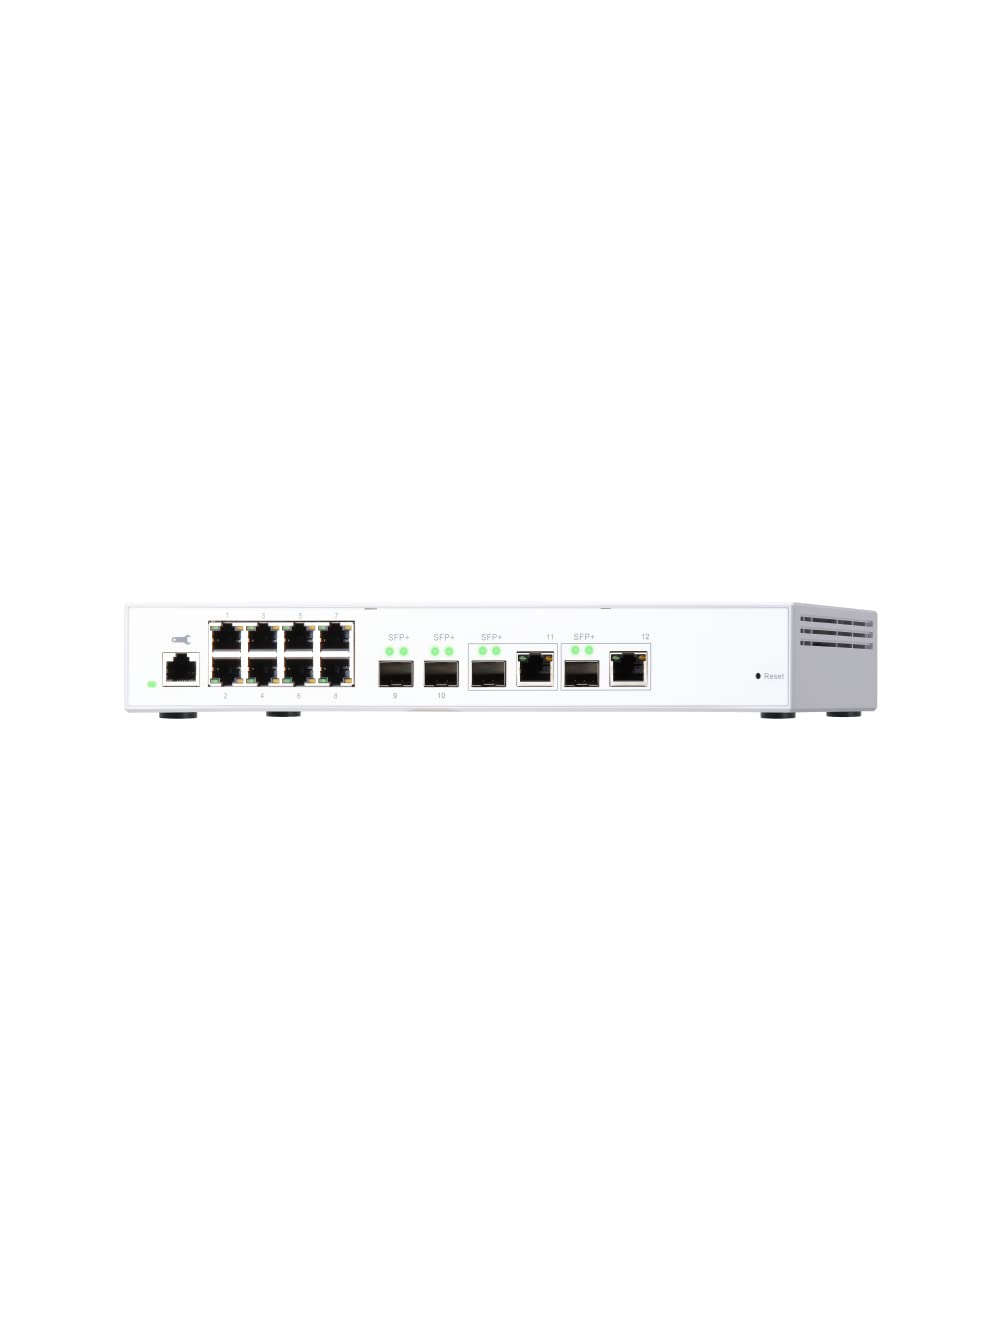 QNAP QSW-M408-2C 10GbE Managed Switch, with 2-Port 10GbE SFP+/RJ45 Combo, 2-Port 10GbE SFP+, 2-Port 10GbE BASE-T (RJ45) and 8-Port Gigabit